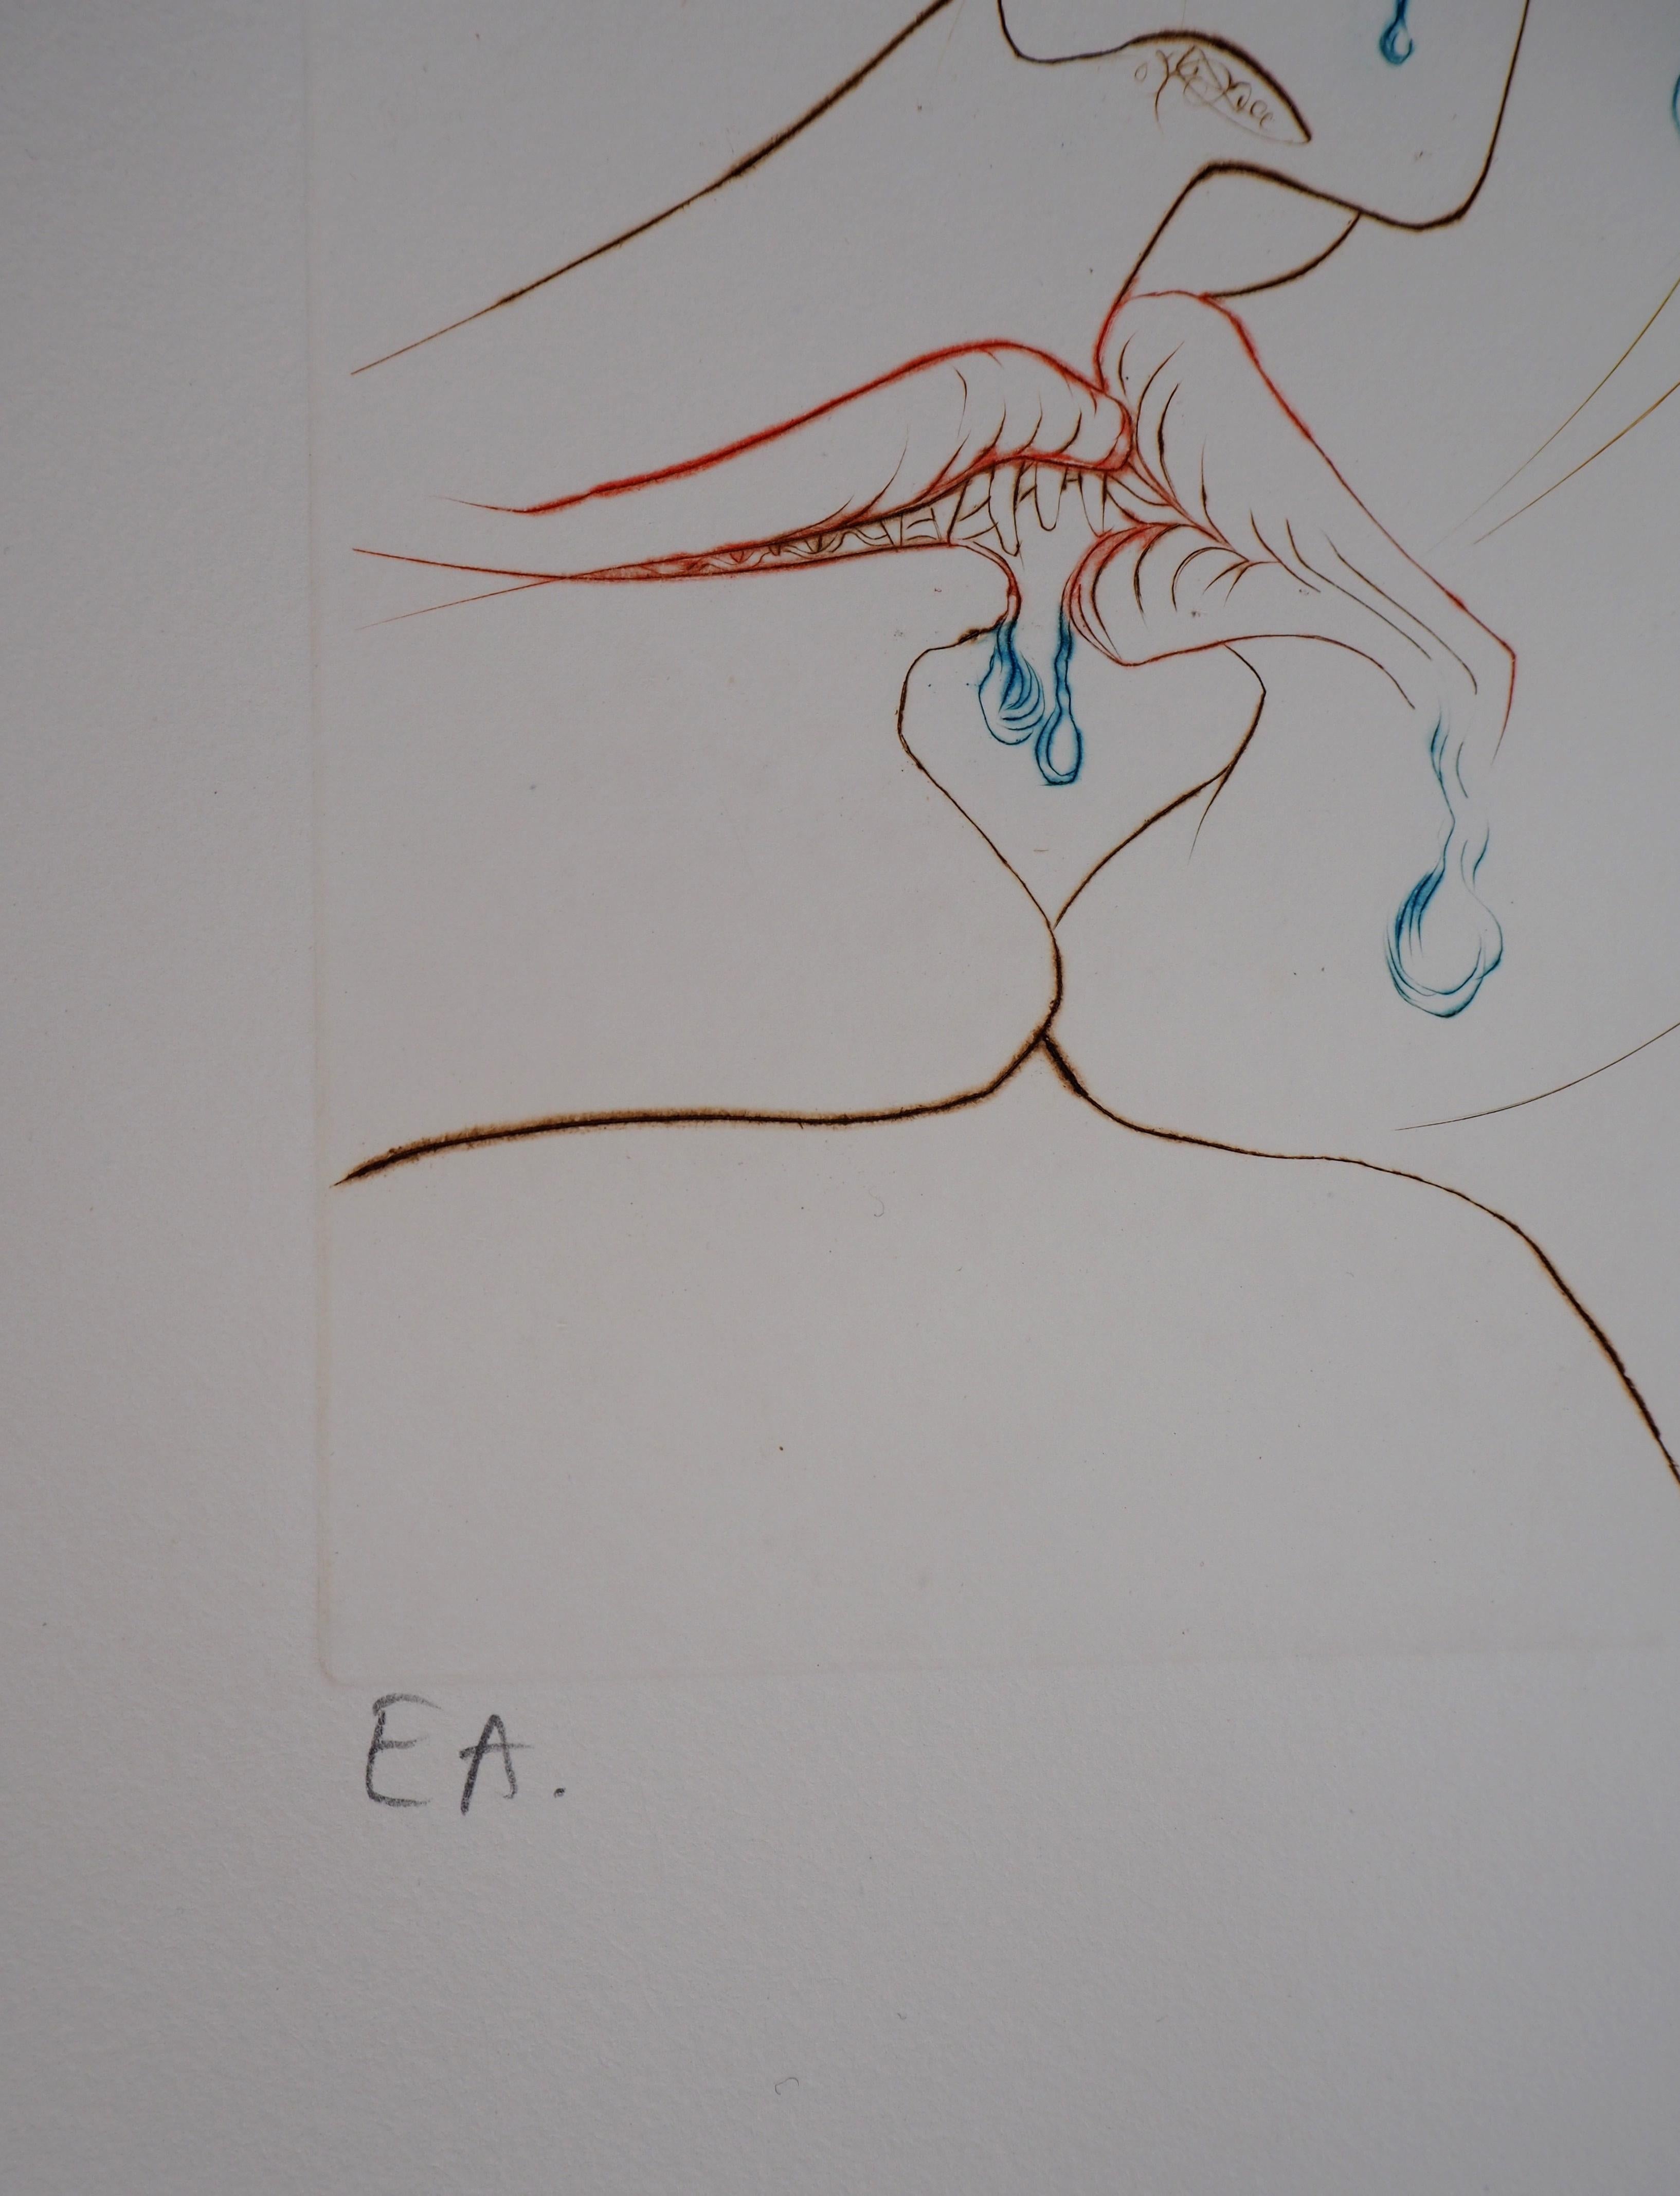 Milton, Lost Paradise : The Kiss - Original Hand Signed Etching, 1974 - Surrealist Print by Salvador Dalí